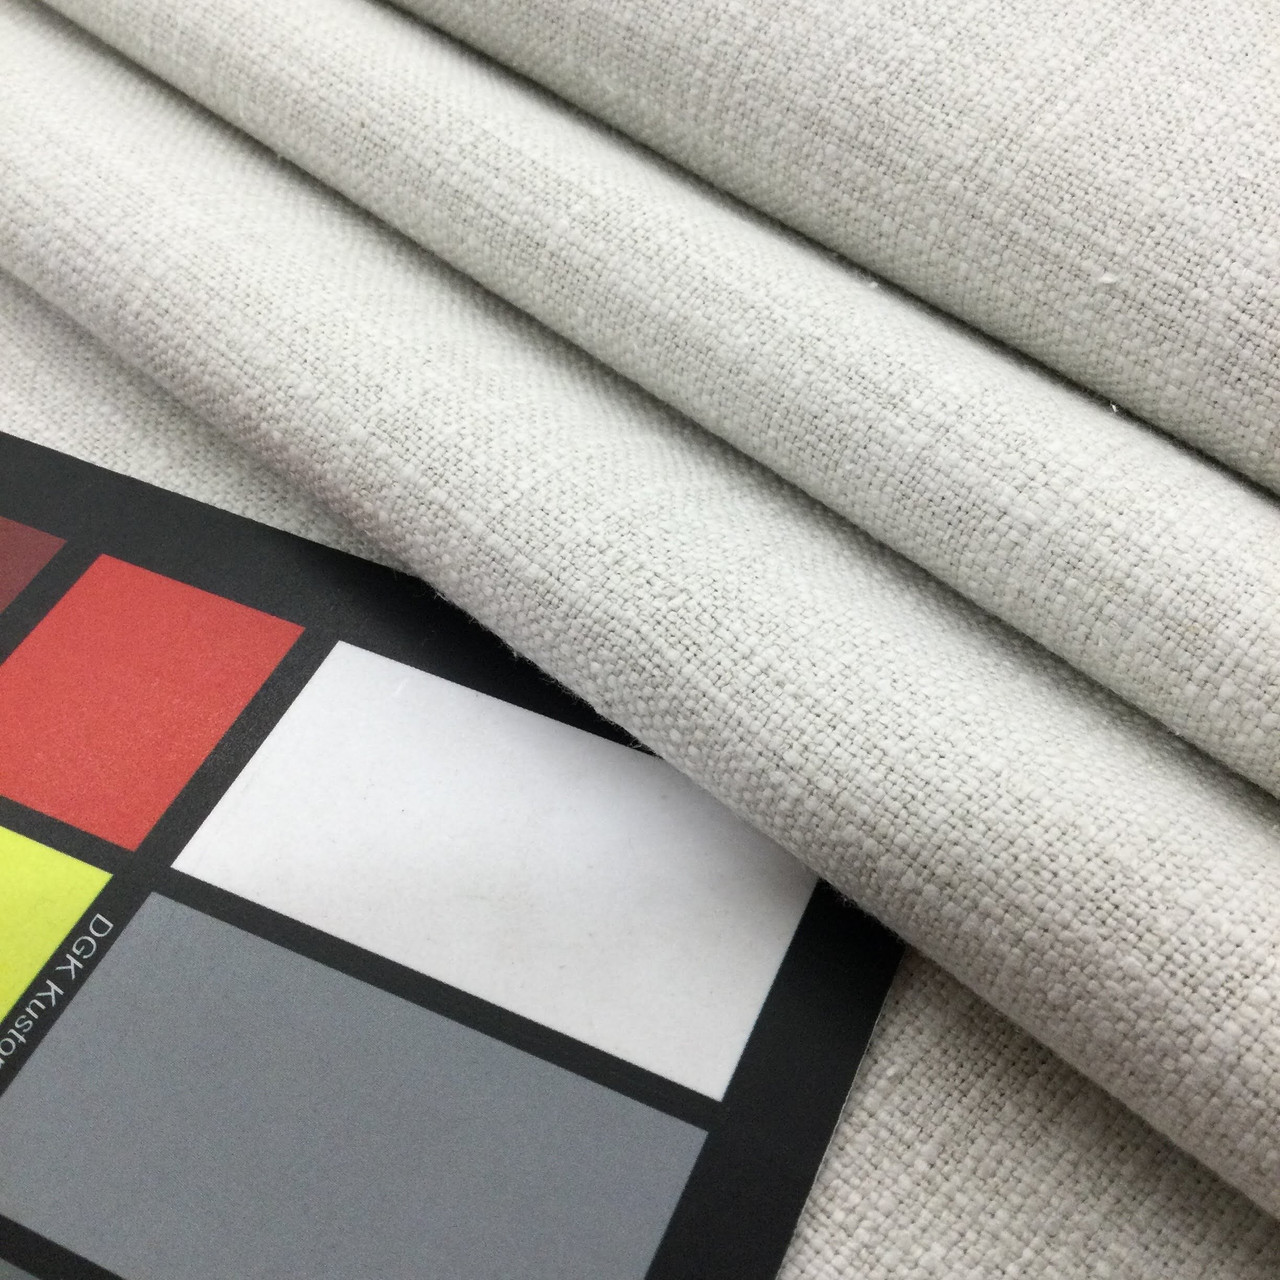 CLEARANCE: Polycotton Fabric 54 wide - SAVE 25%